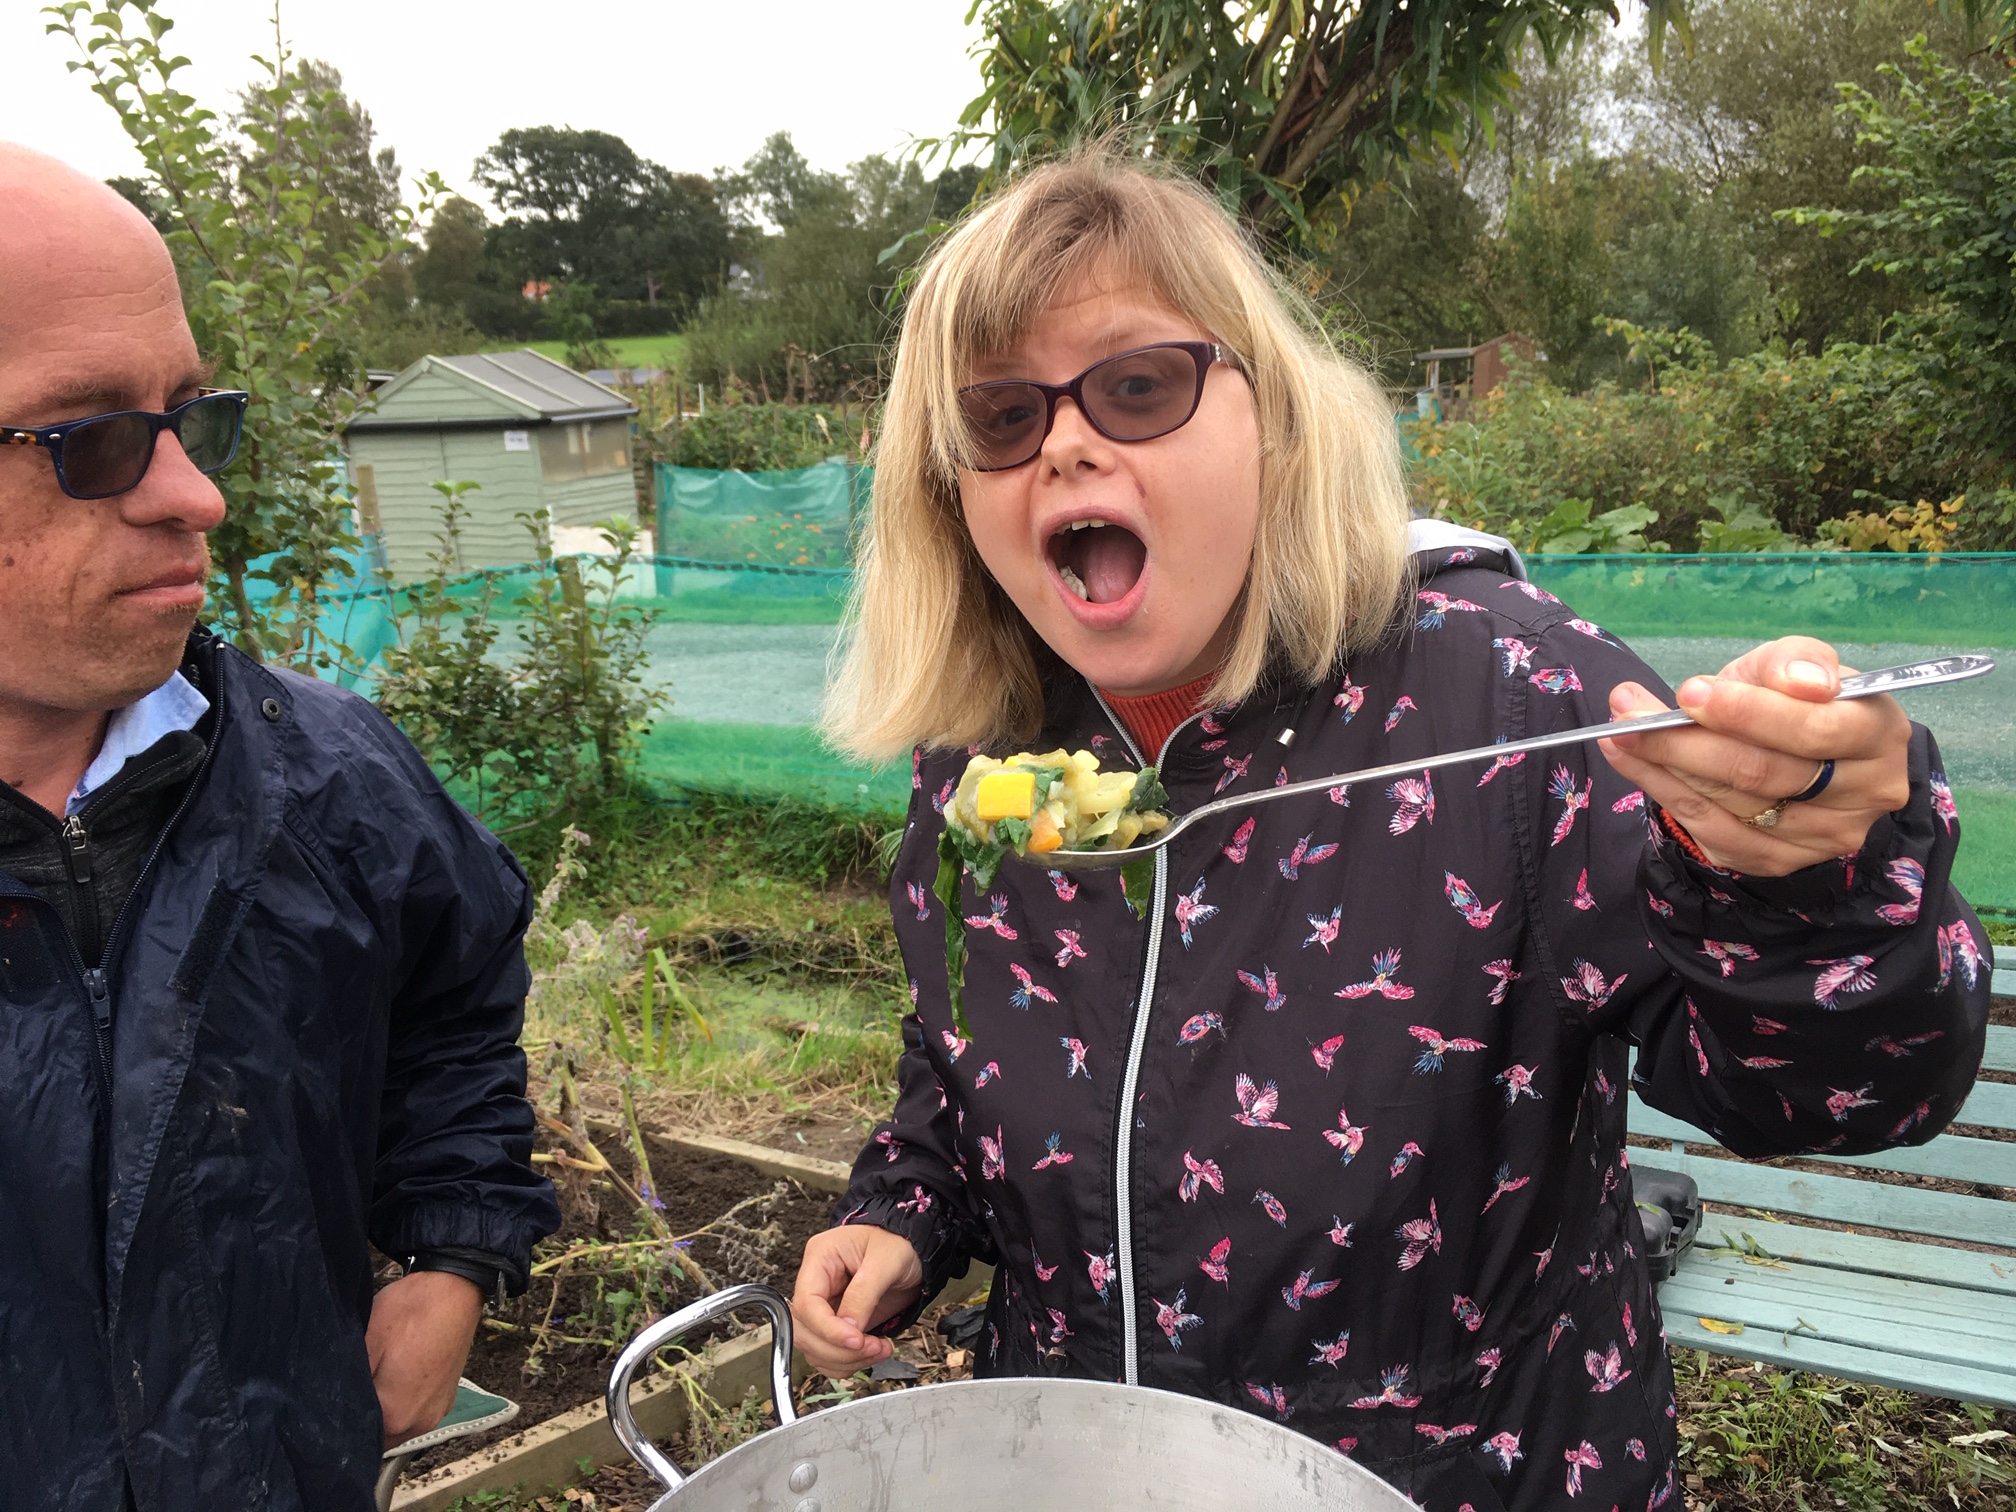 A woman at an allotment eating a big spoonfull of vegetable stew.